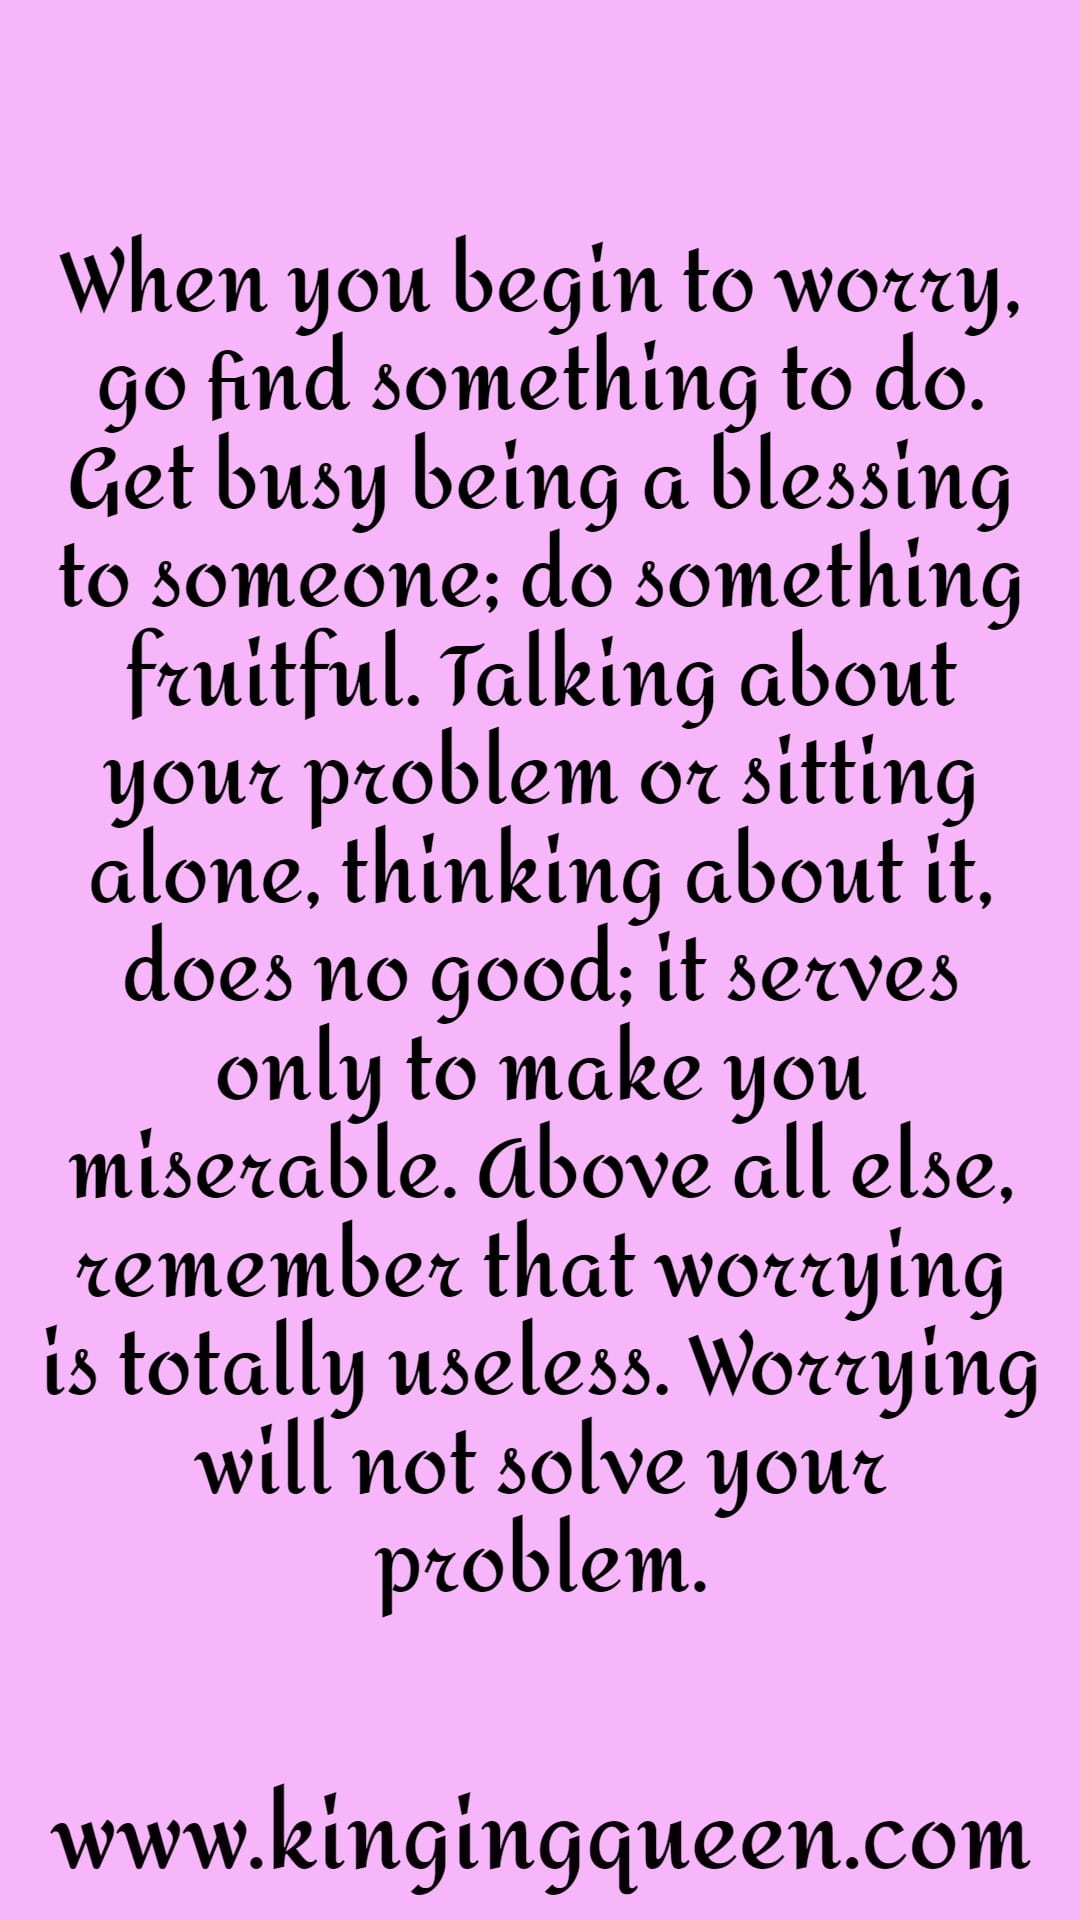 blessing quotes